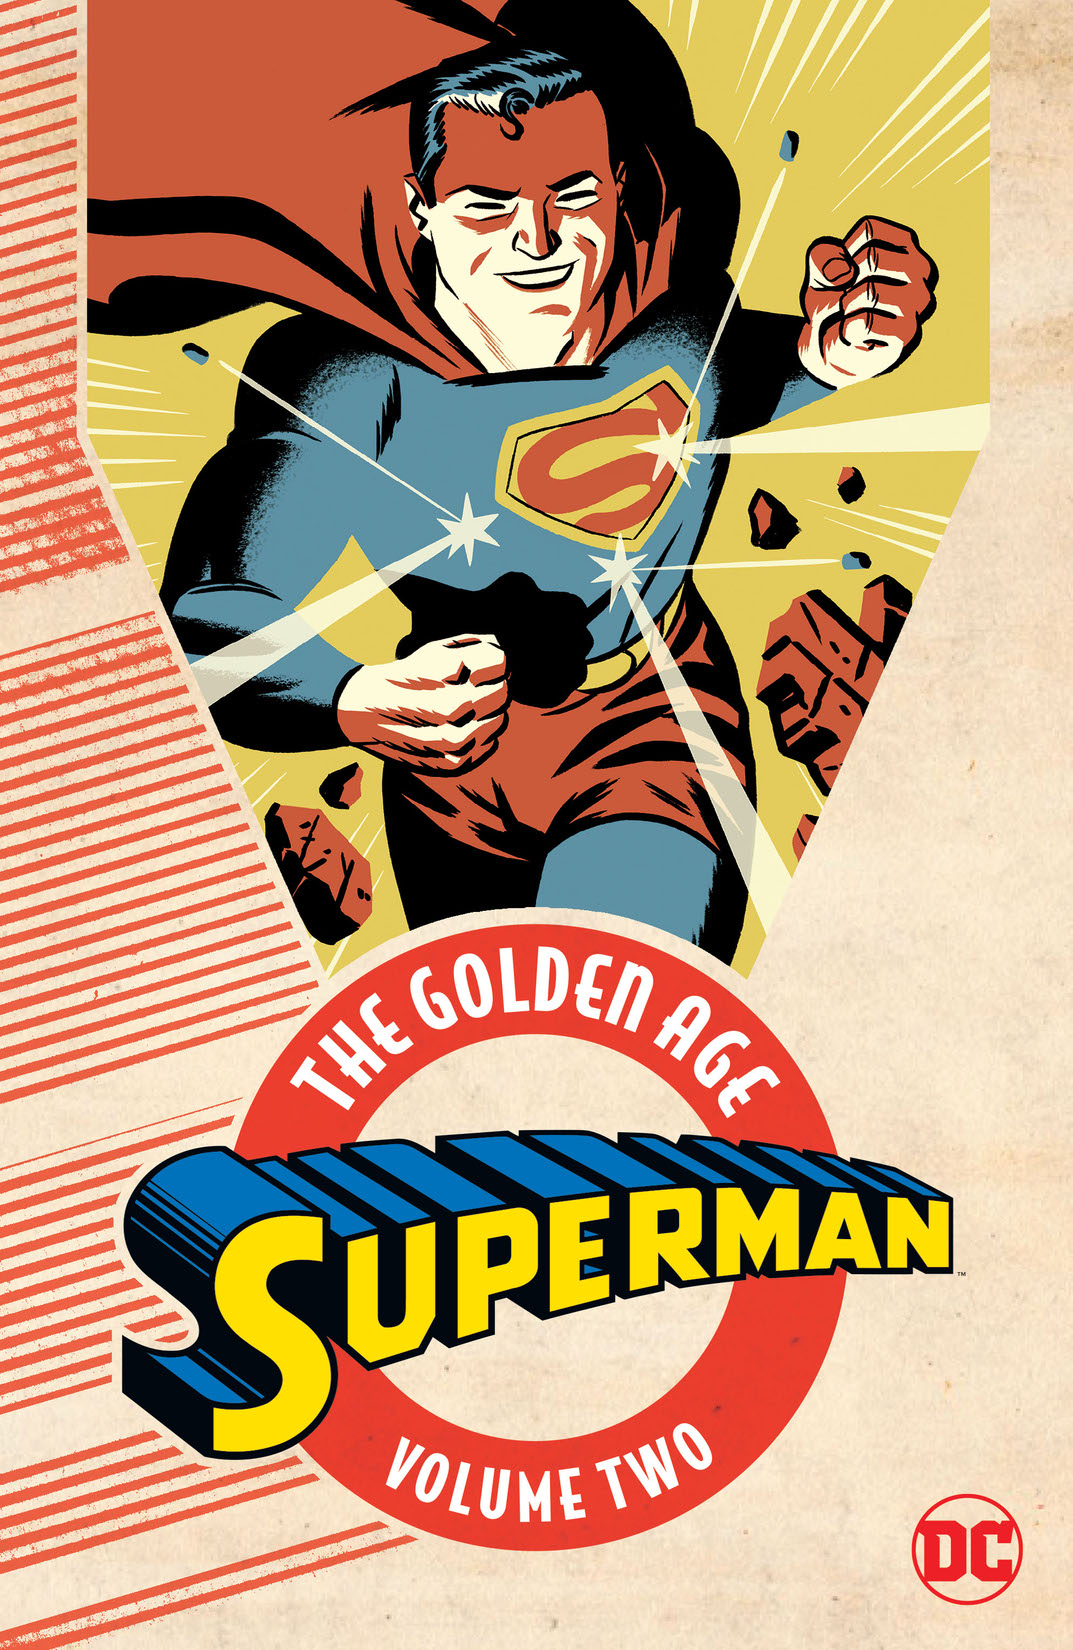 Superman: The Golden Age Vol. 2 preview images